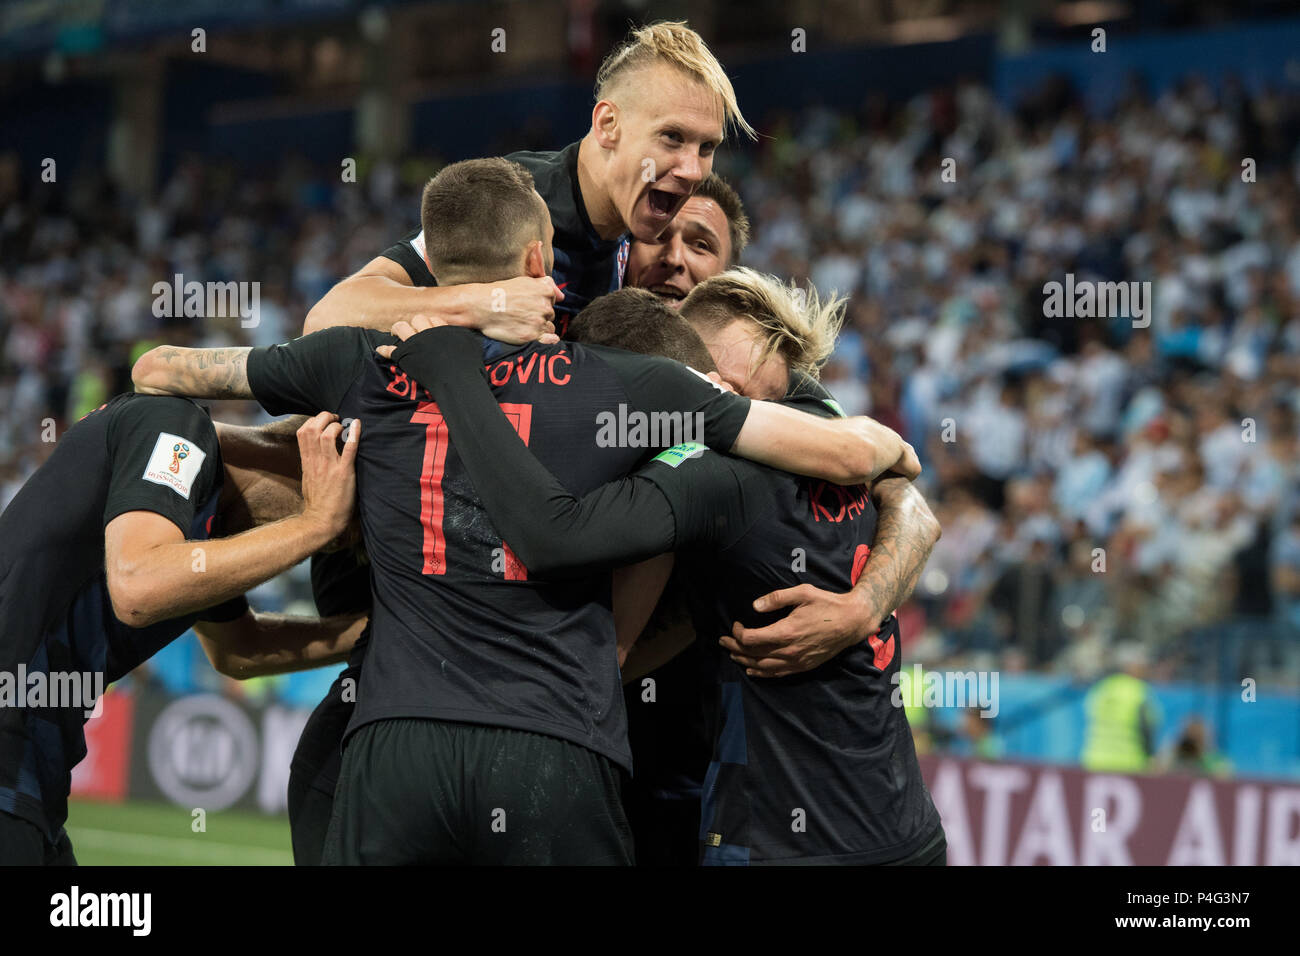 Nizhny Novgorod, Russia. 21 June 2018.  jubilationtraube of croatian players after the goal to make it 3-0 for Croatia, jubilation, cheering, cheering, joy, cheers, celebrate, goaljubel, half figure, half figure, Argentina (ARG) - Croatia (CRO) 0: 3, preliminary round, Group D, Game 23, on 21.06.2018 in Moscow; Football World Cup 2018 in Russia from 14.06. - 15.07.2018. | usage worldwide Credit: dpa/Alamy Live News Credit: dpa picture alliance/Alamy Live News Stock Photo